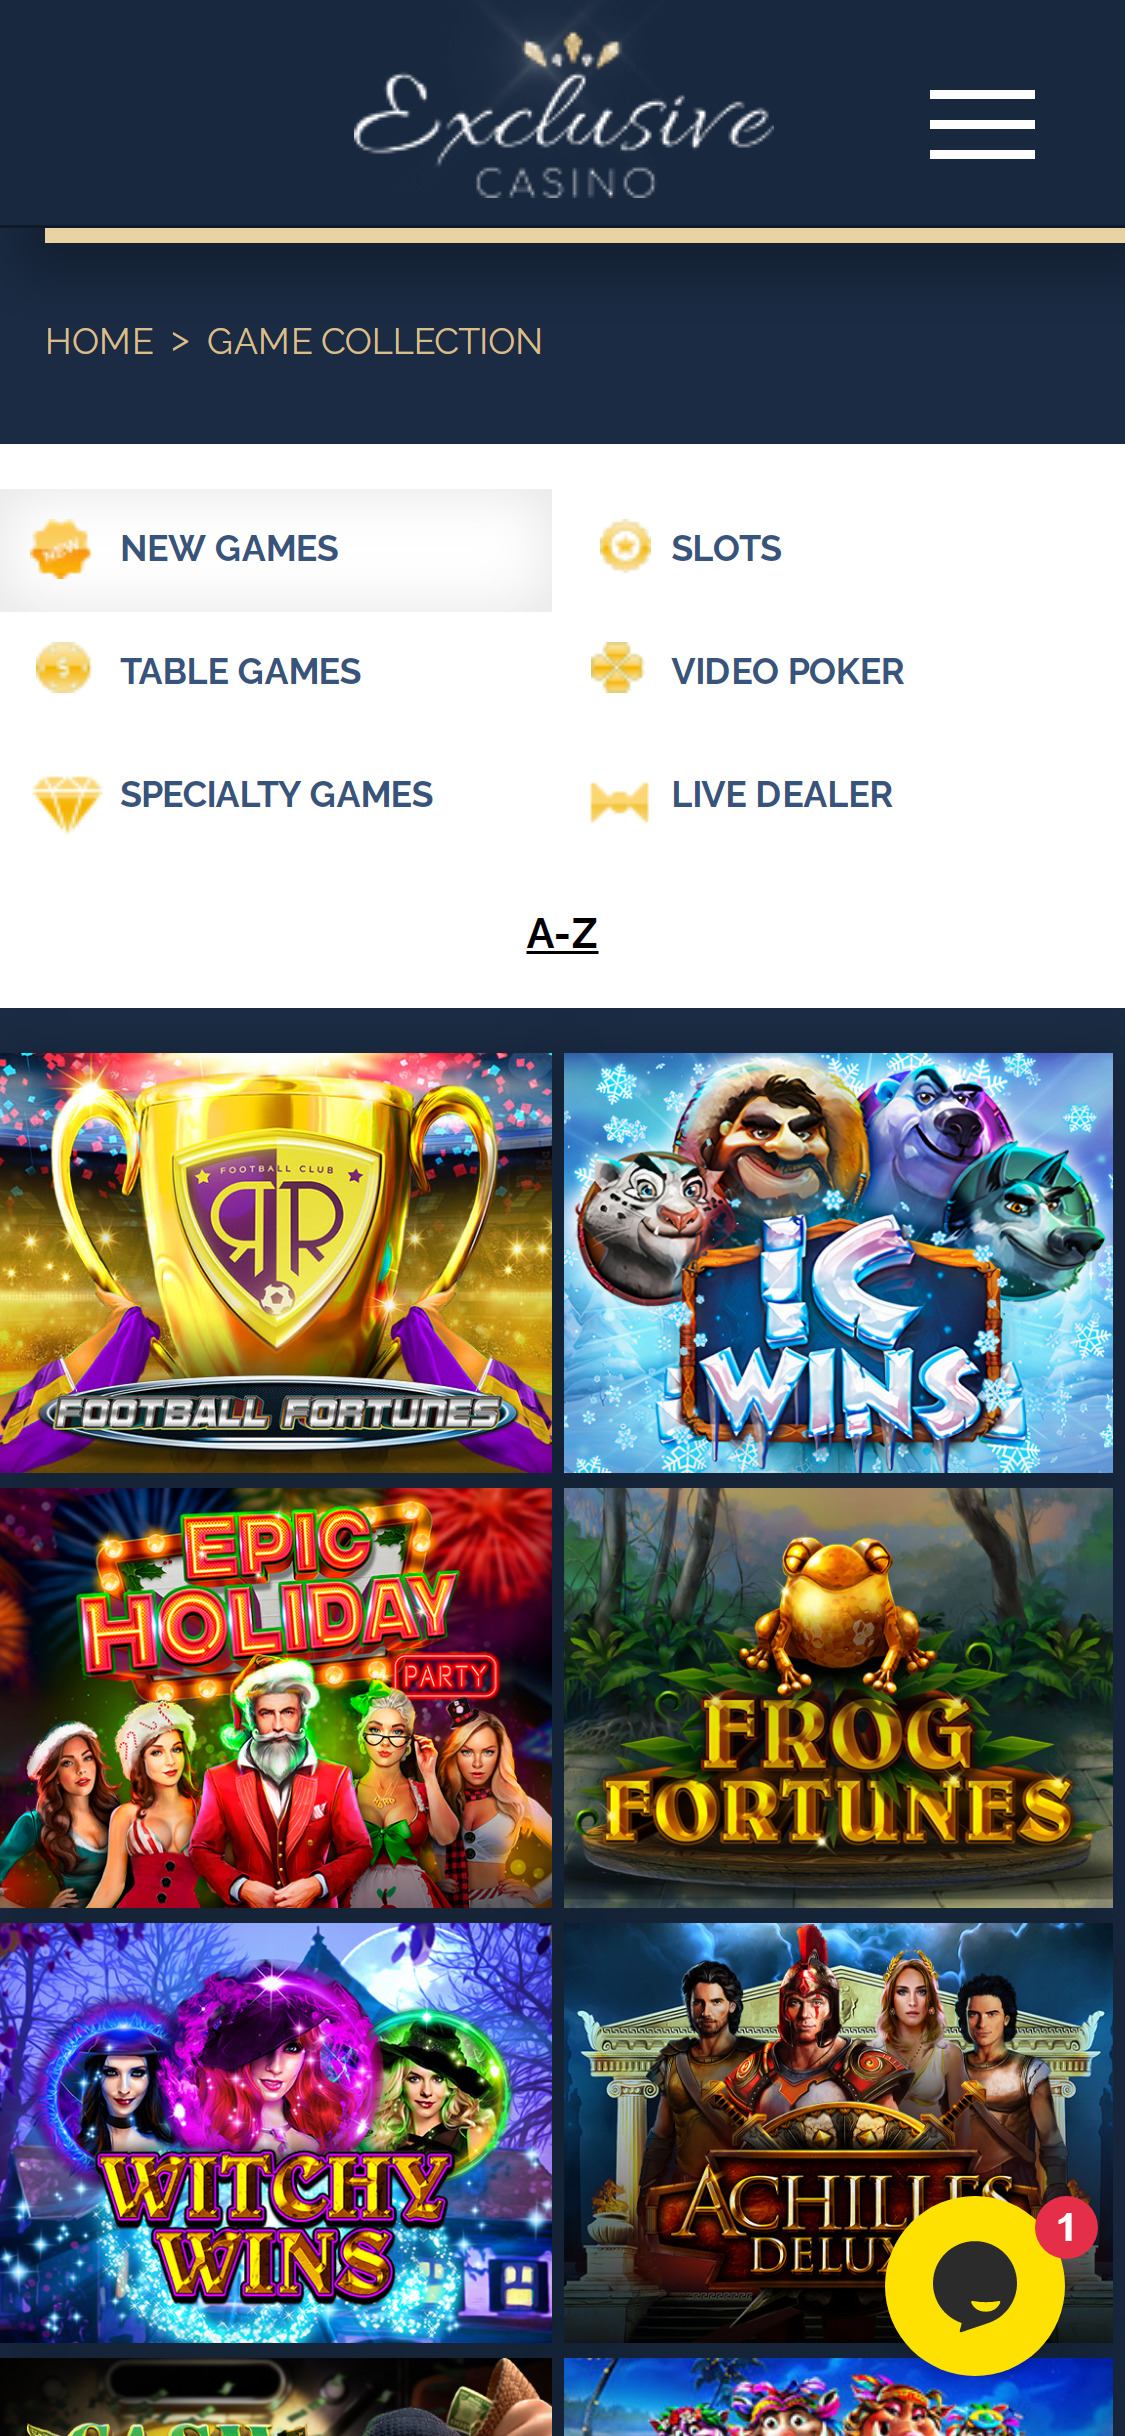 Exclusive Casino Mobile Games Review